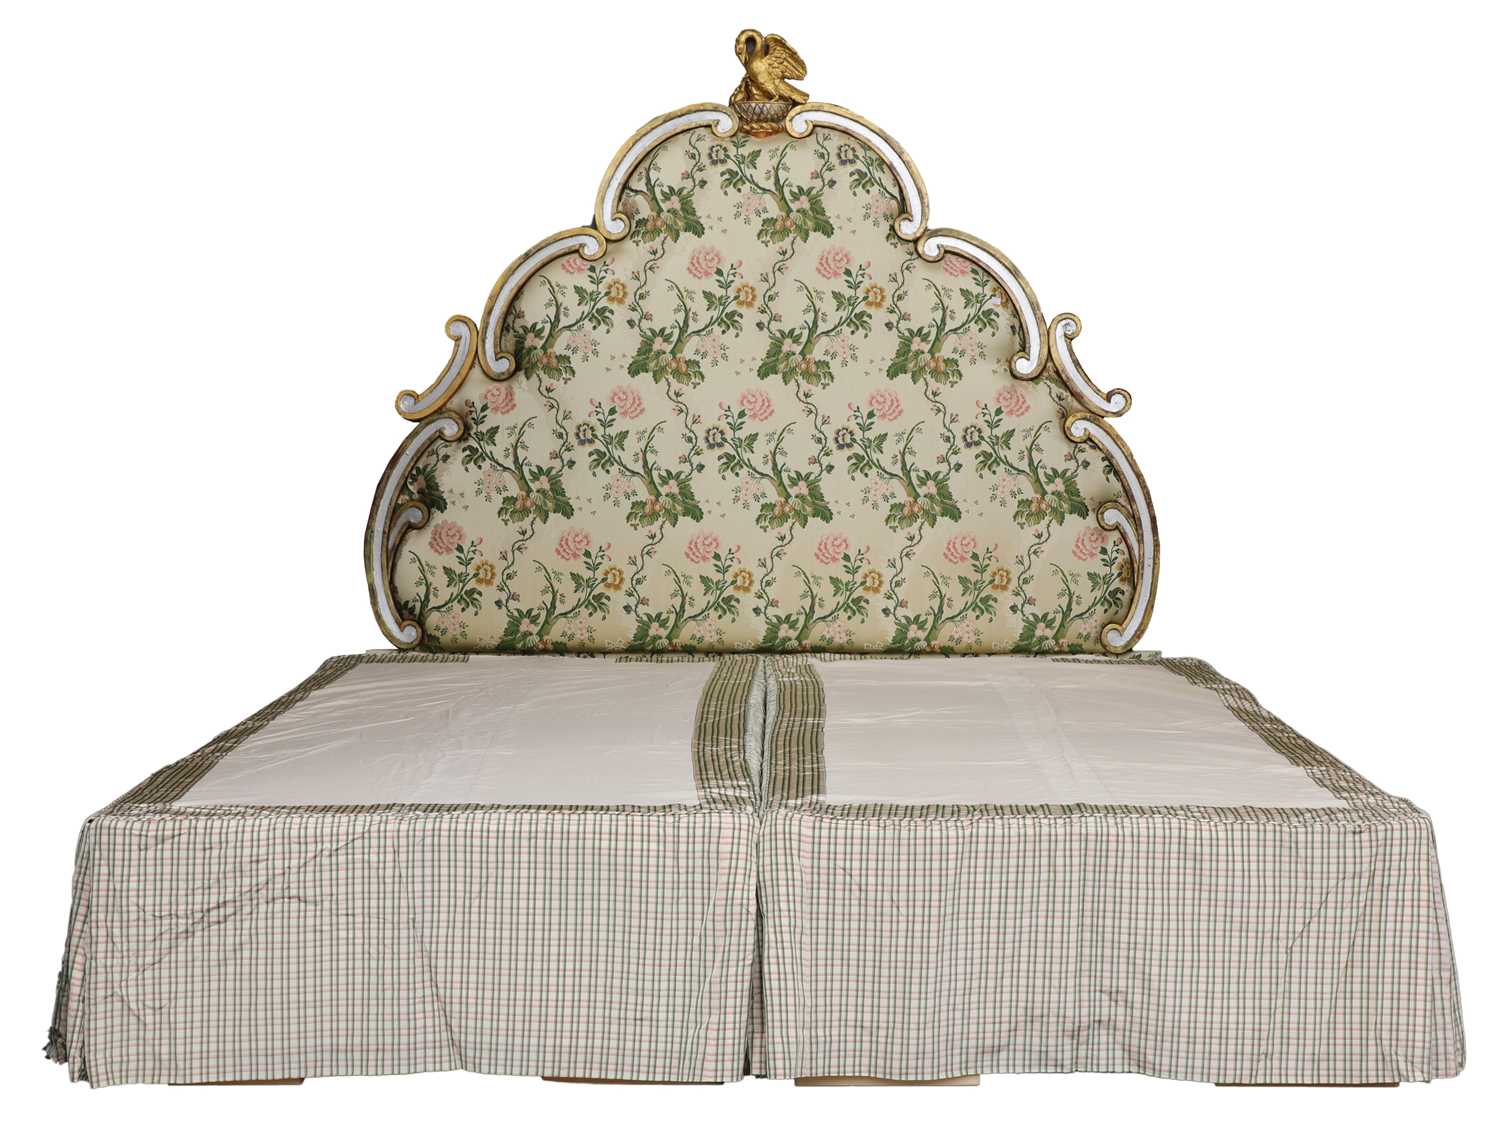 Lot 86 - An Emperor bed